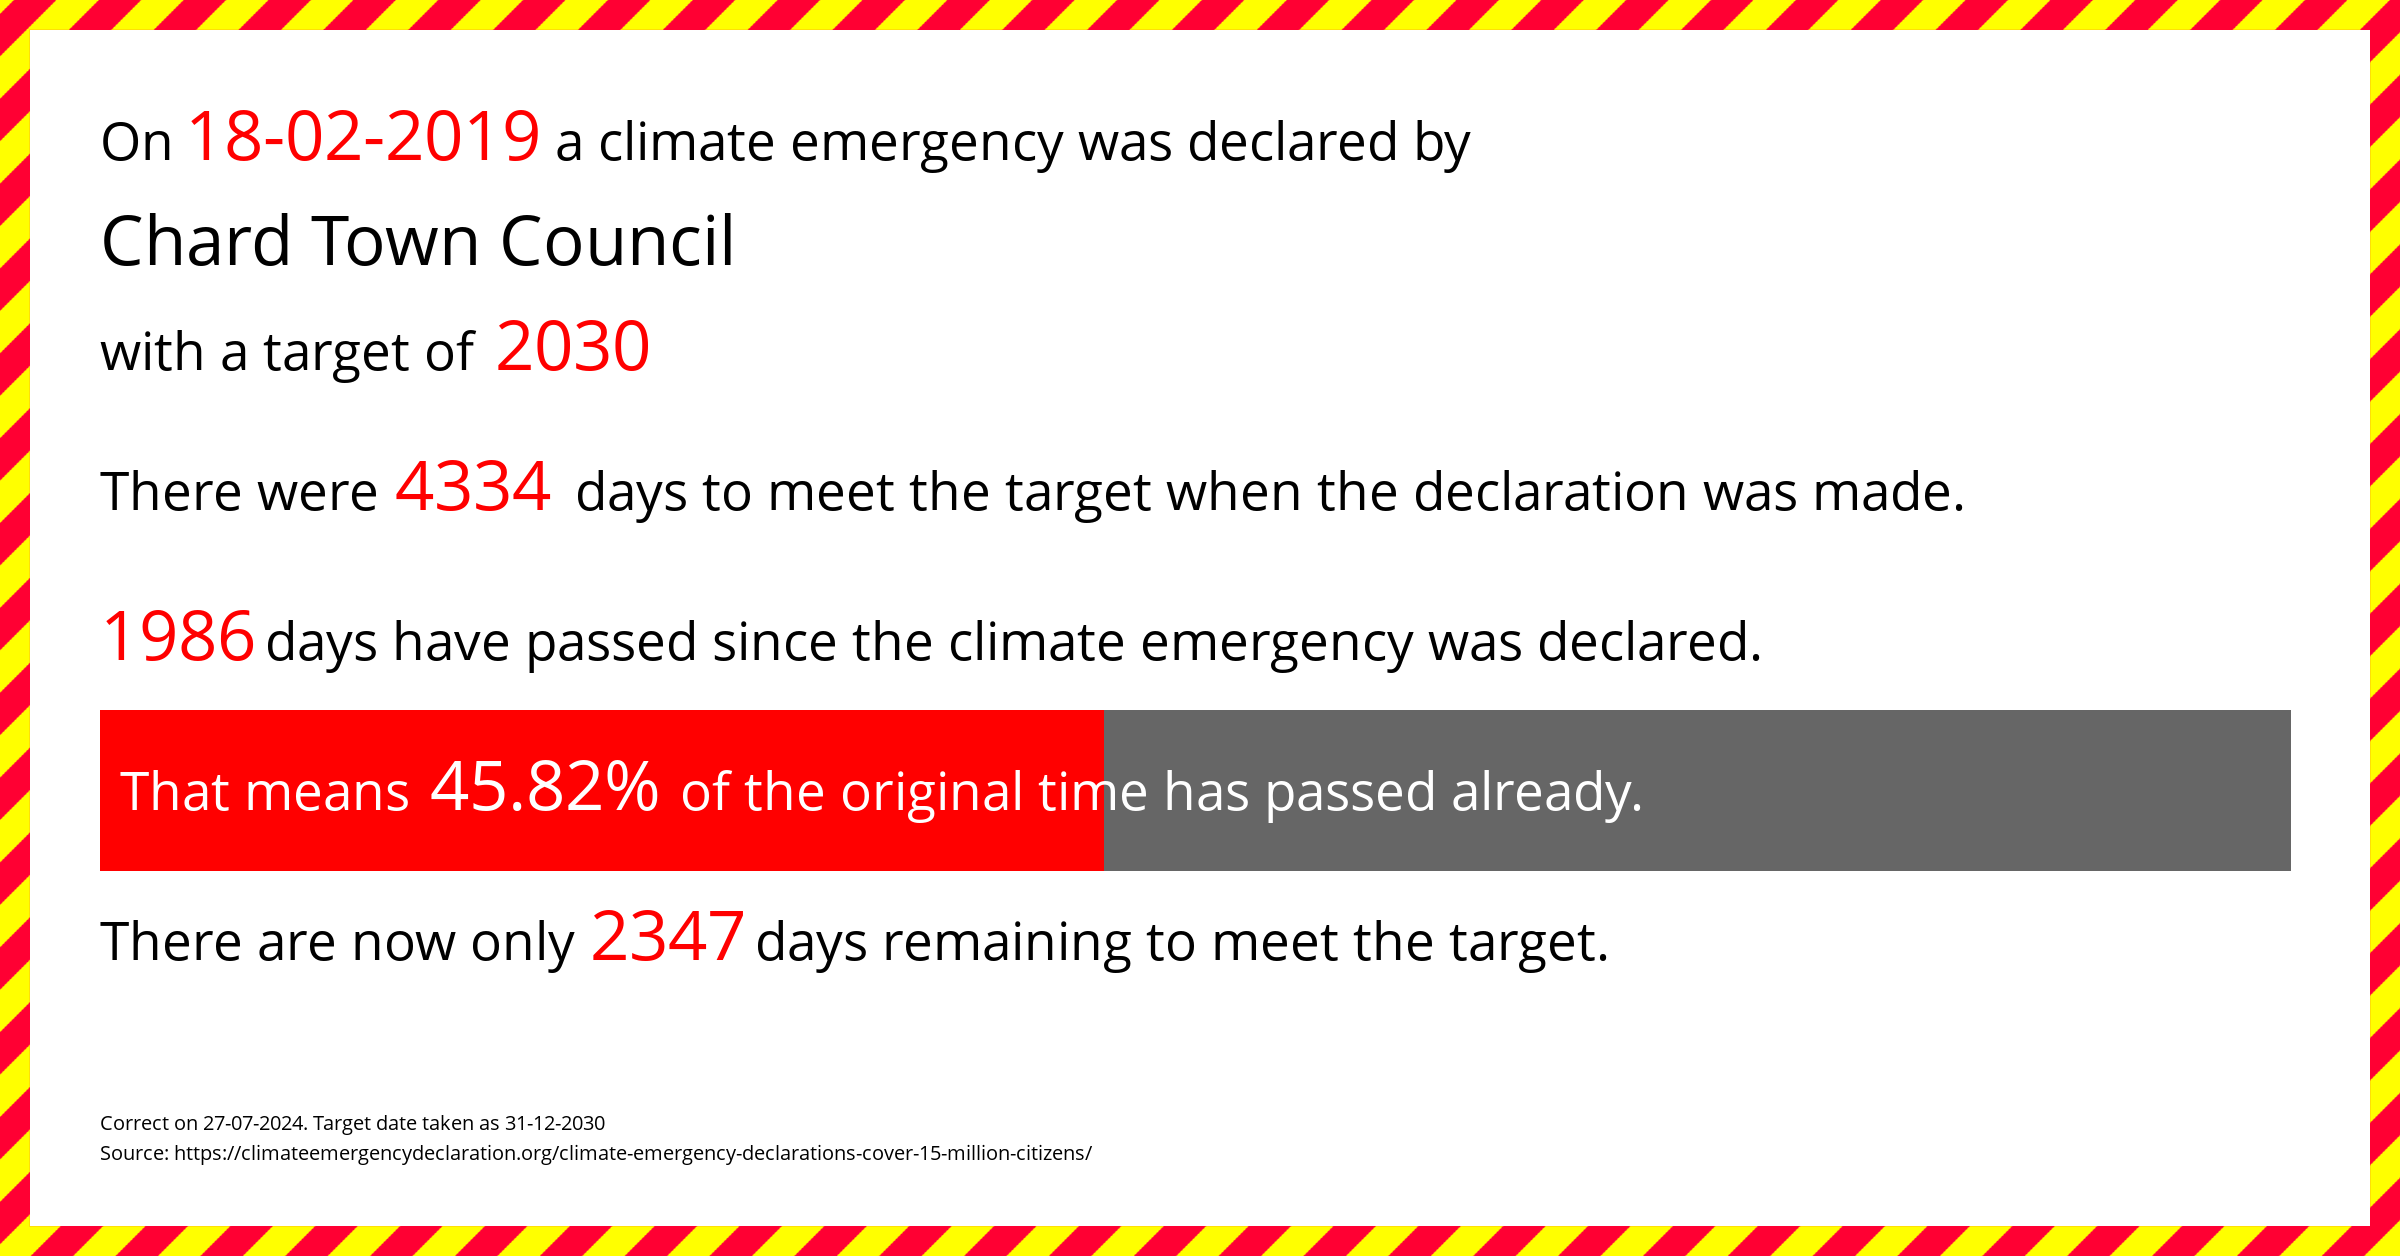 Chard Town Council declared a Climate emergency on Monday 18th February 2019, with a target of 2030.